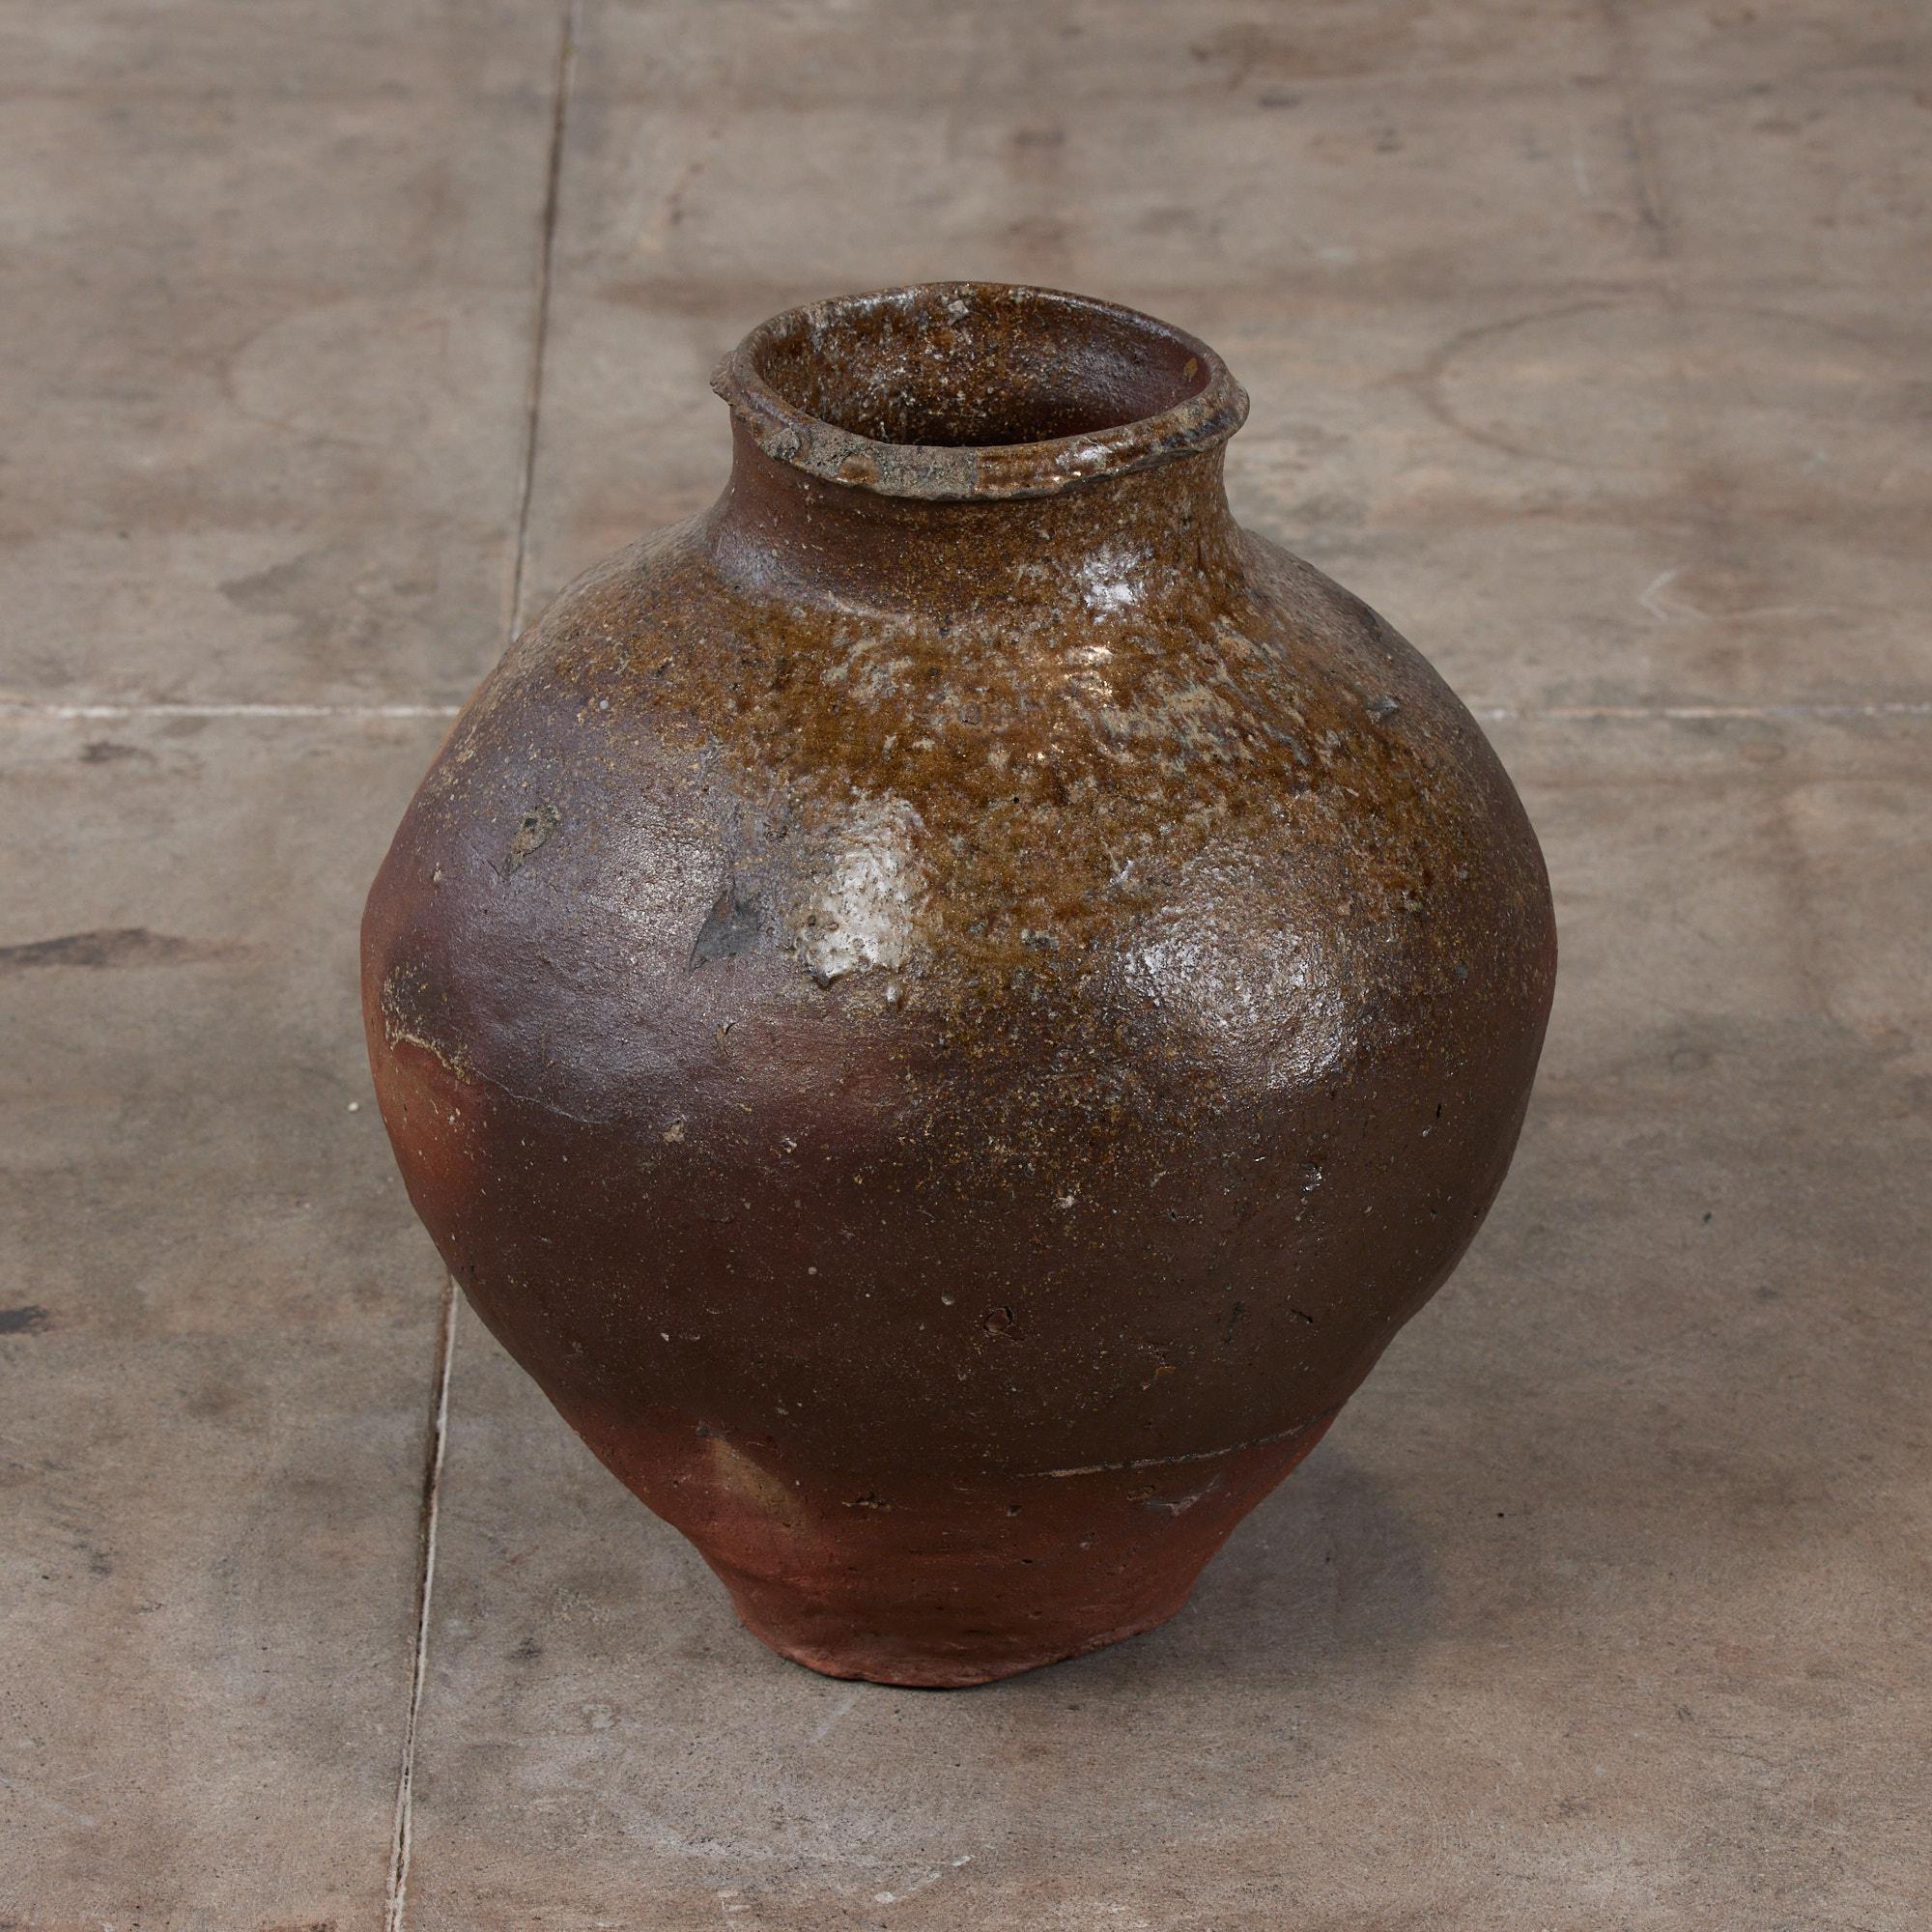 Japanese ceramic vessel from Shiga, Japan. This piece gains its unique glaze and irregularities from the firing process in which wood is added to the kiln. The ash that is produced then falls on the vessel offering shades of yellow and brown while